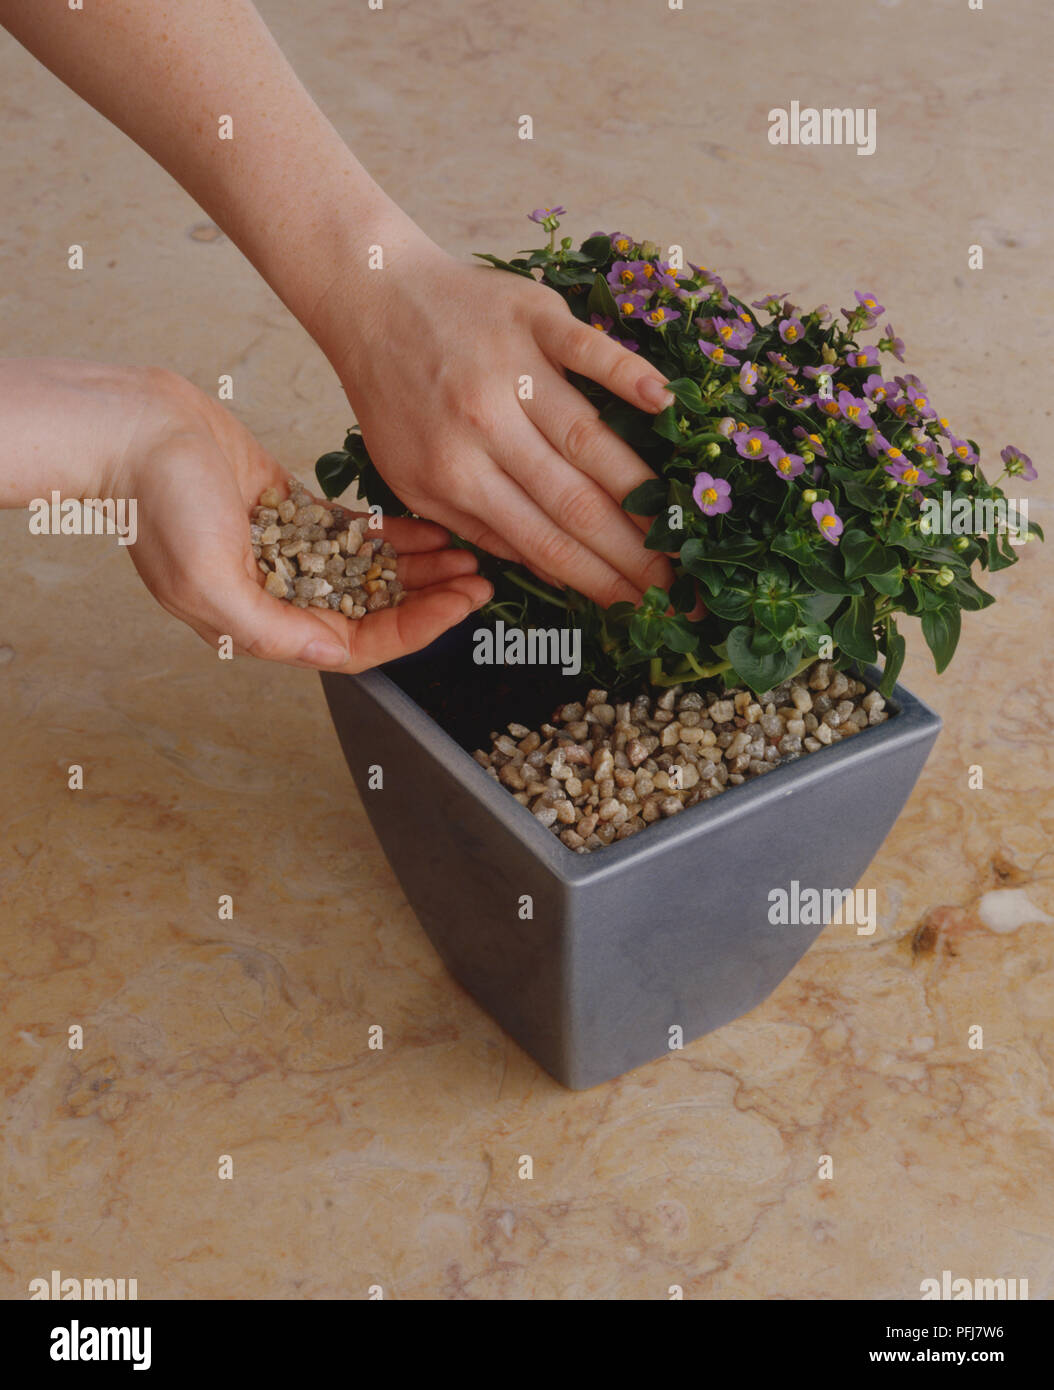 Using cupped palm of hand to add layer of mulch to bushy plant, small green leaves and purple flowers, in blue pot, standing on marble surface Stock Photo